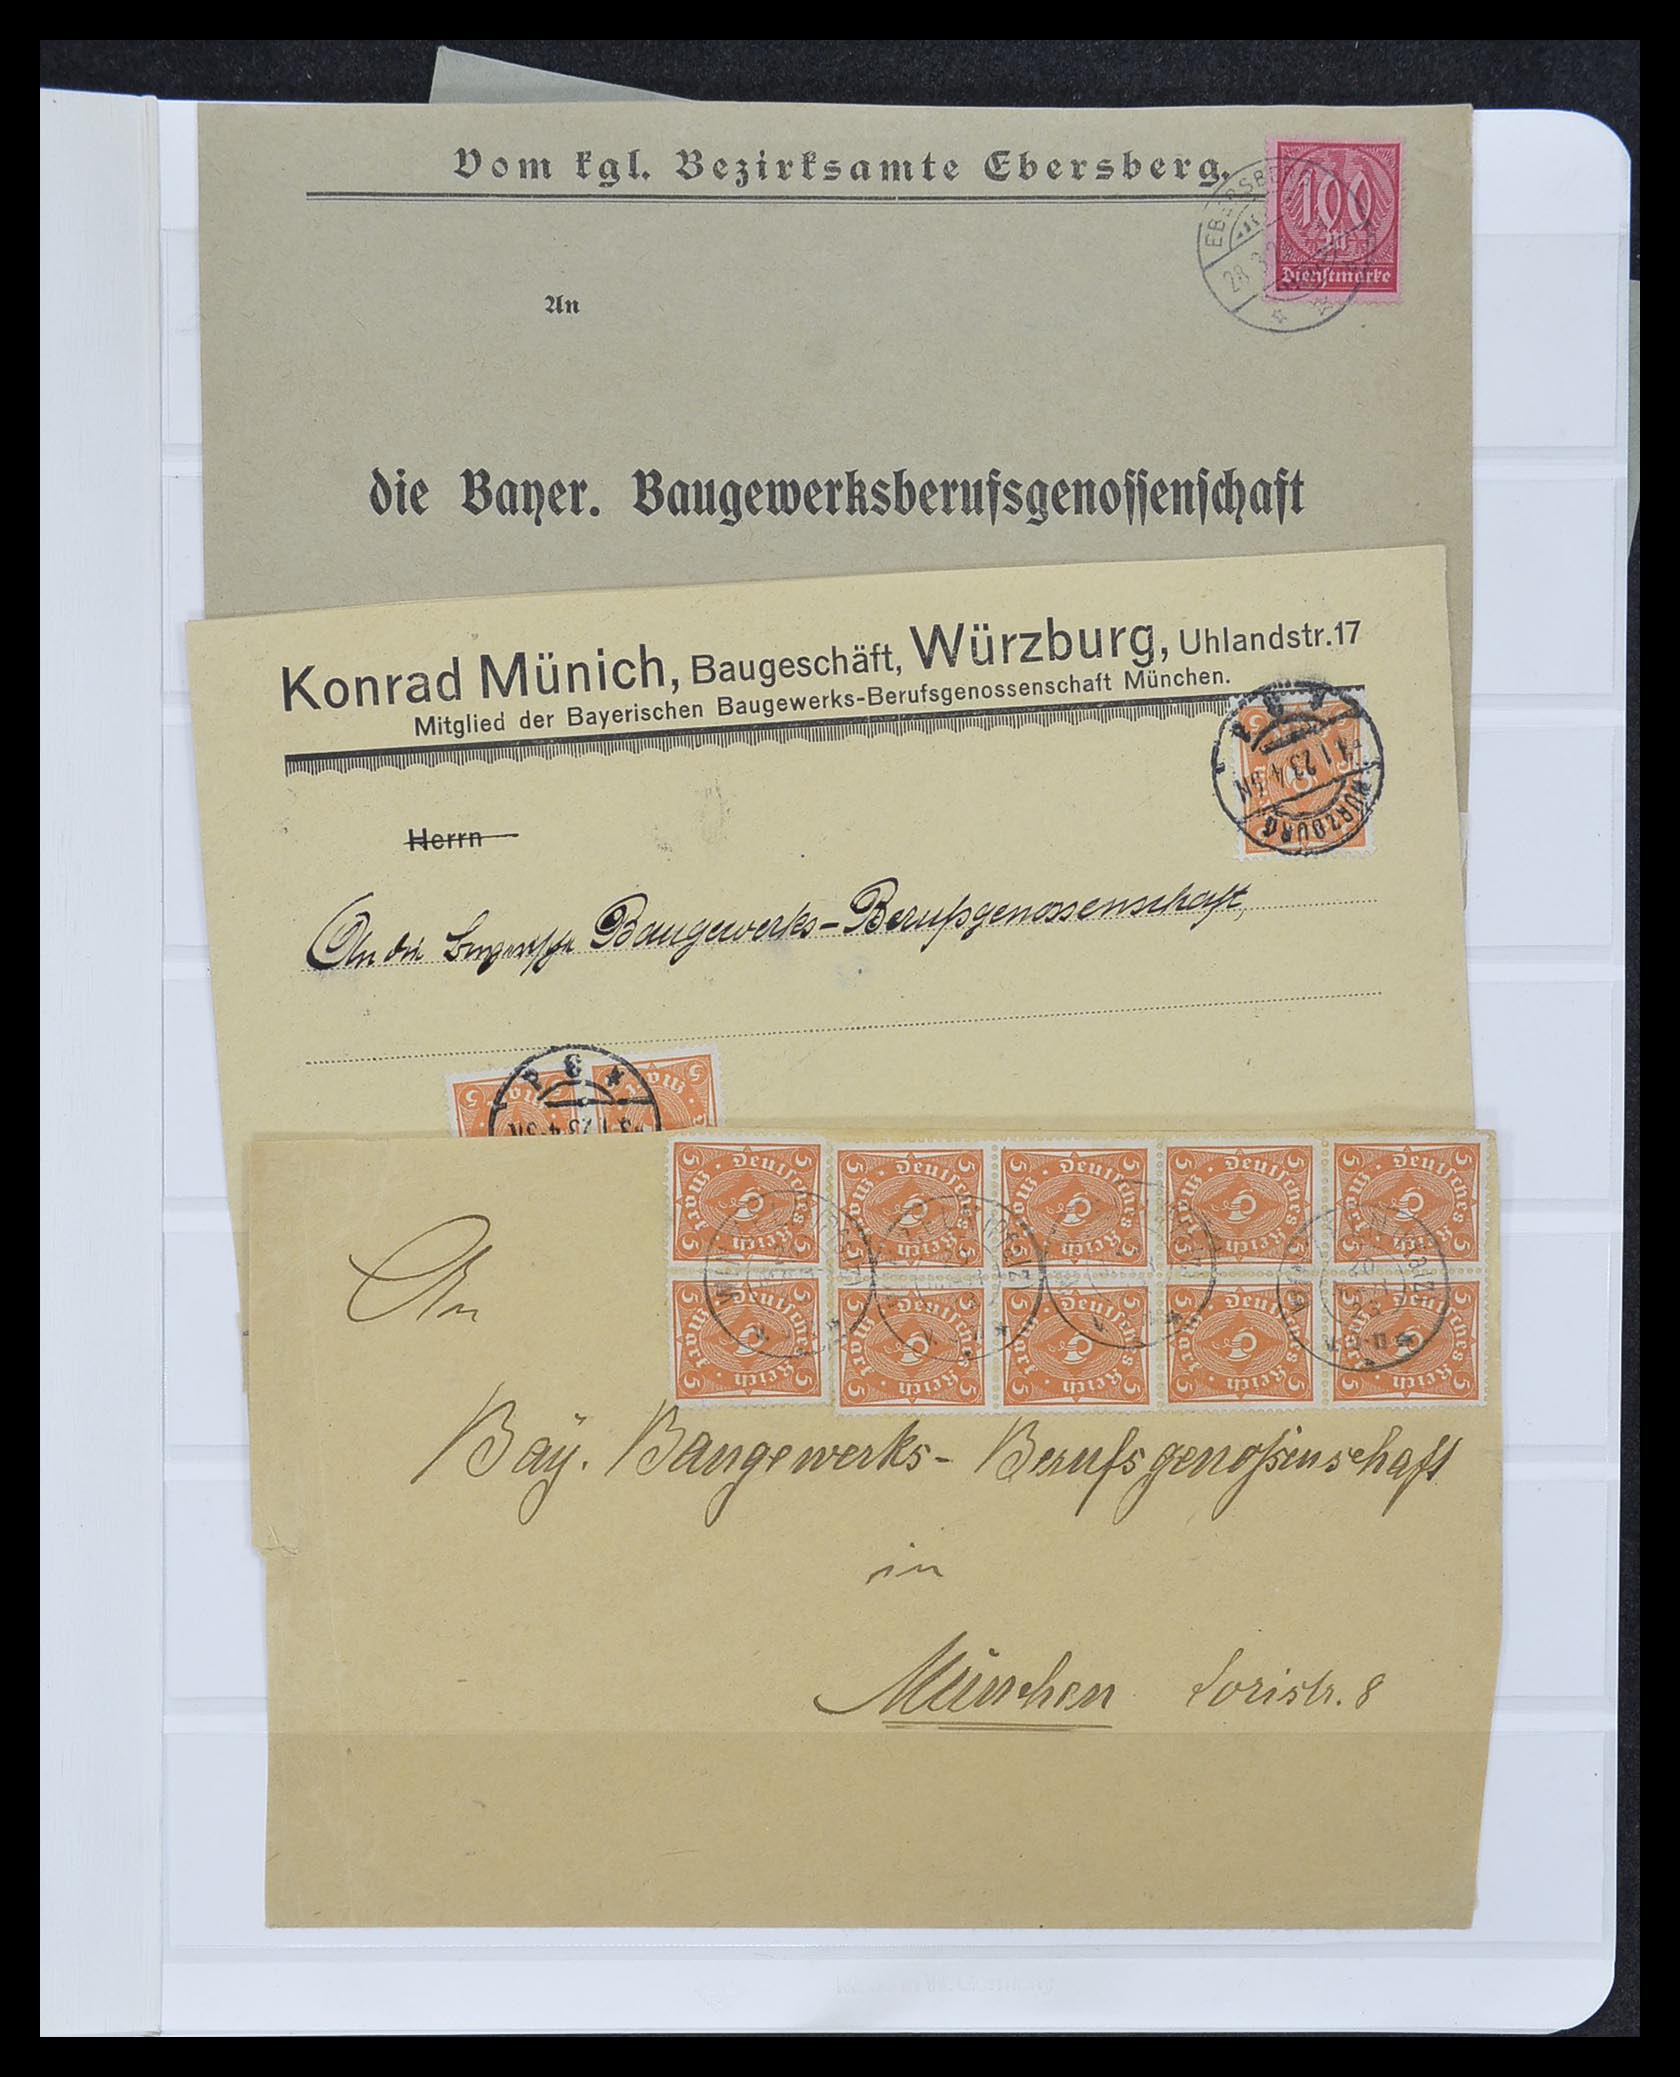 33957 038 - Stamp collection 33957 German Reich infla 1923.